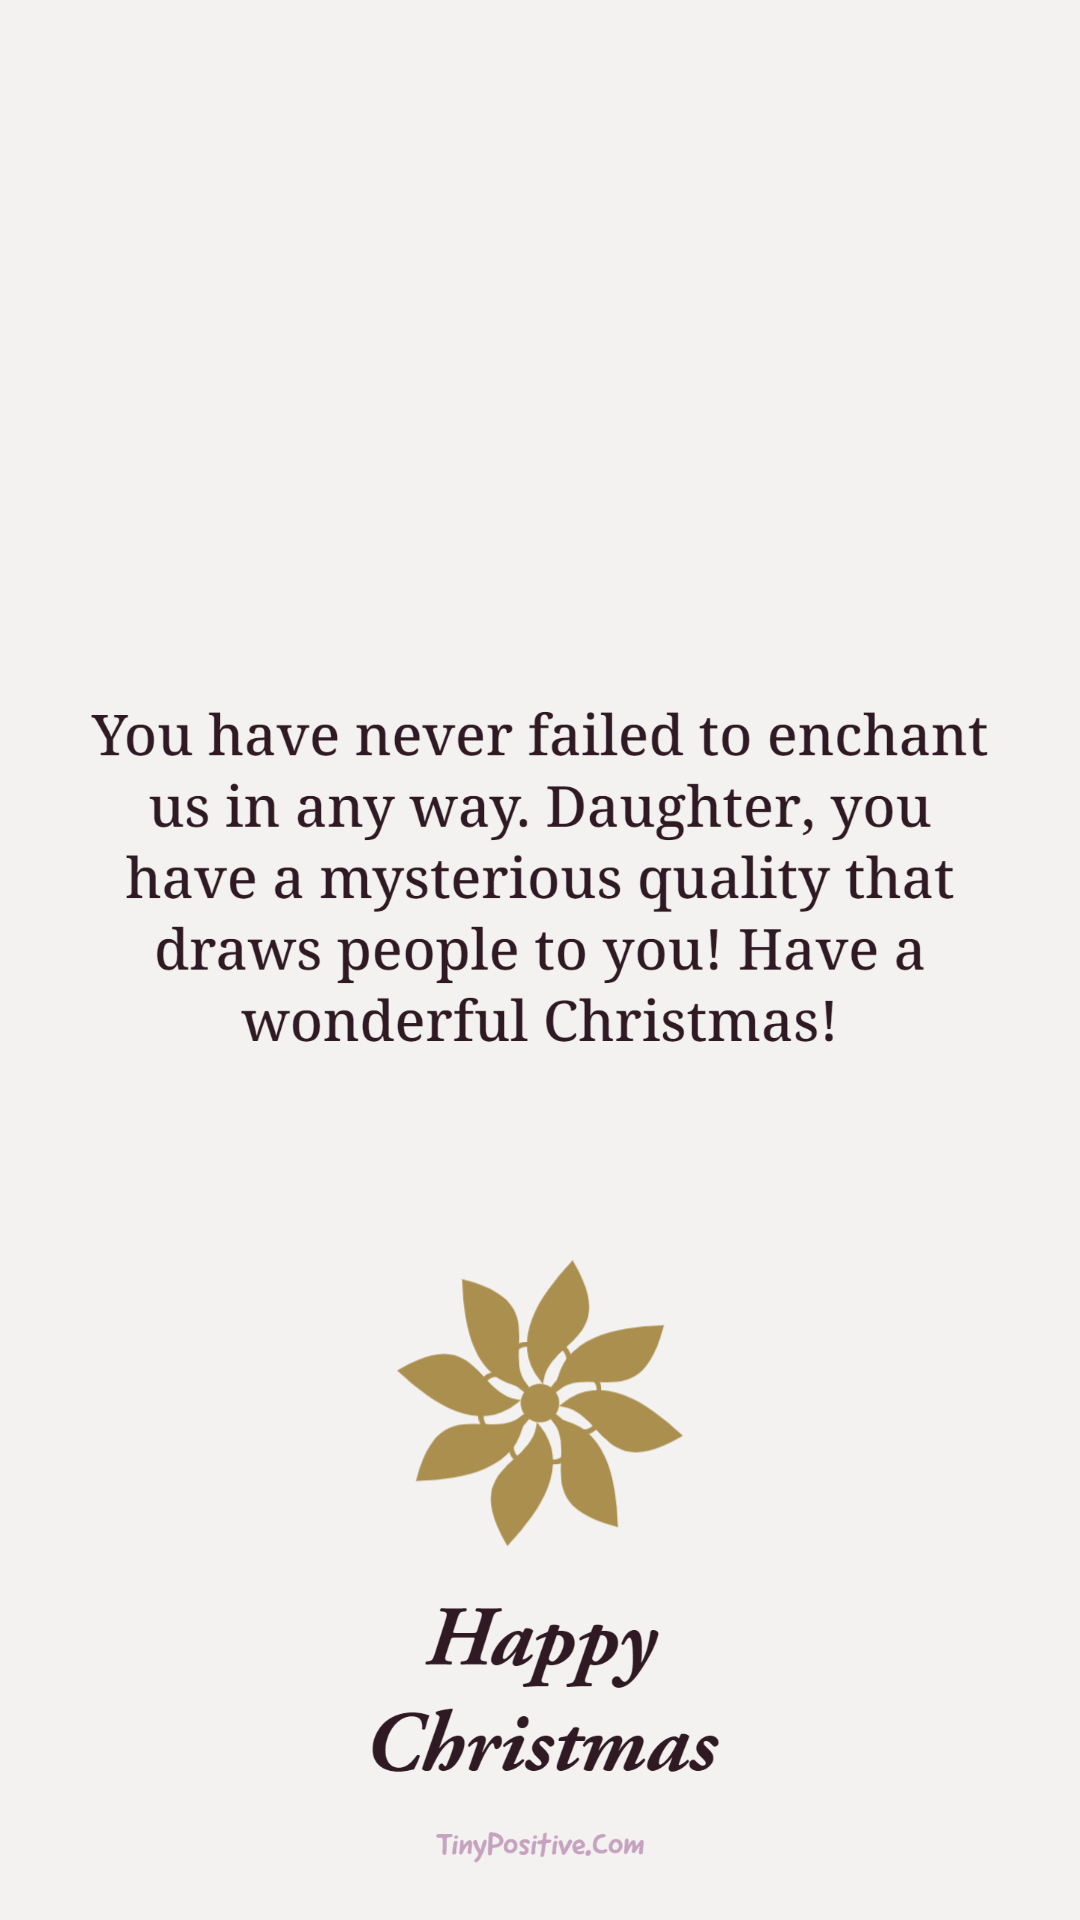 images for christmas messages for daughter happy christmas wishes